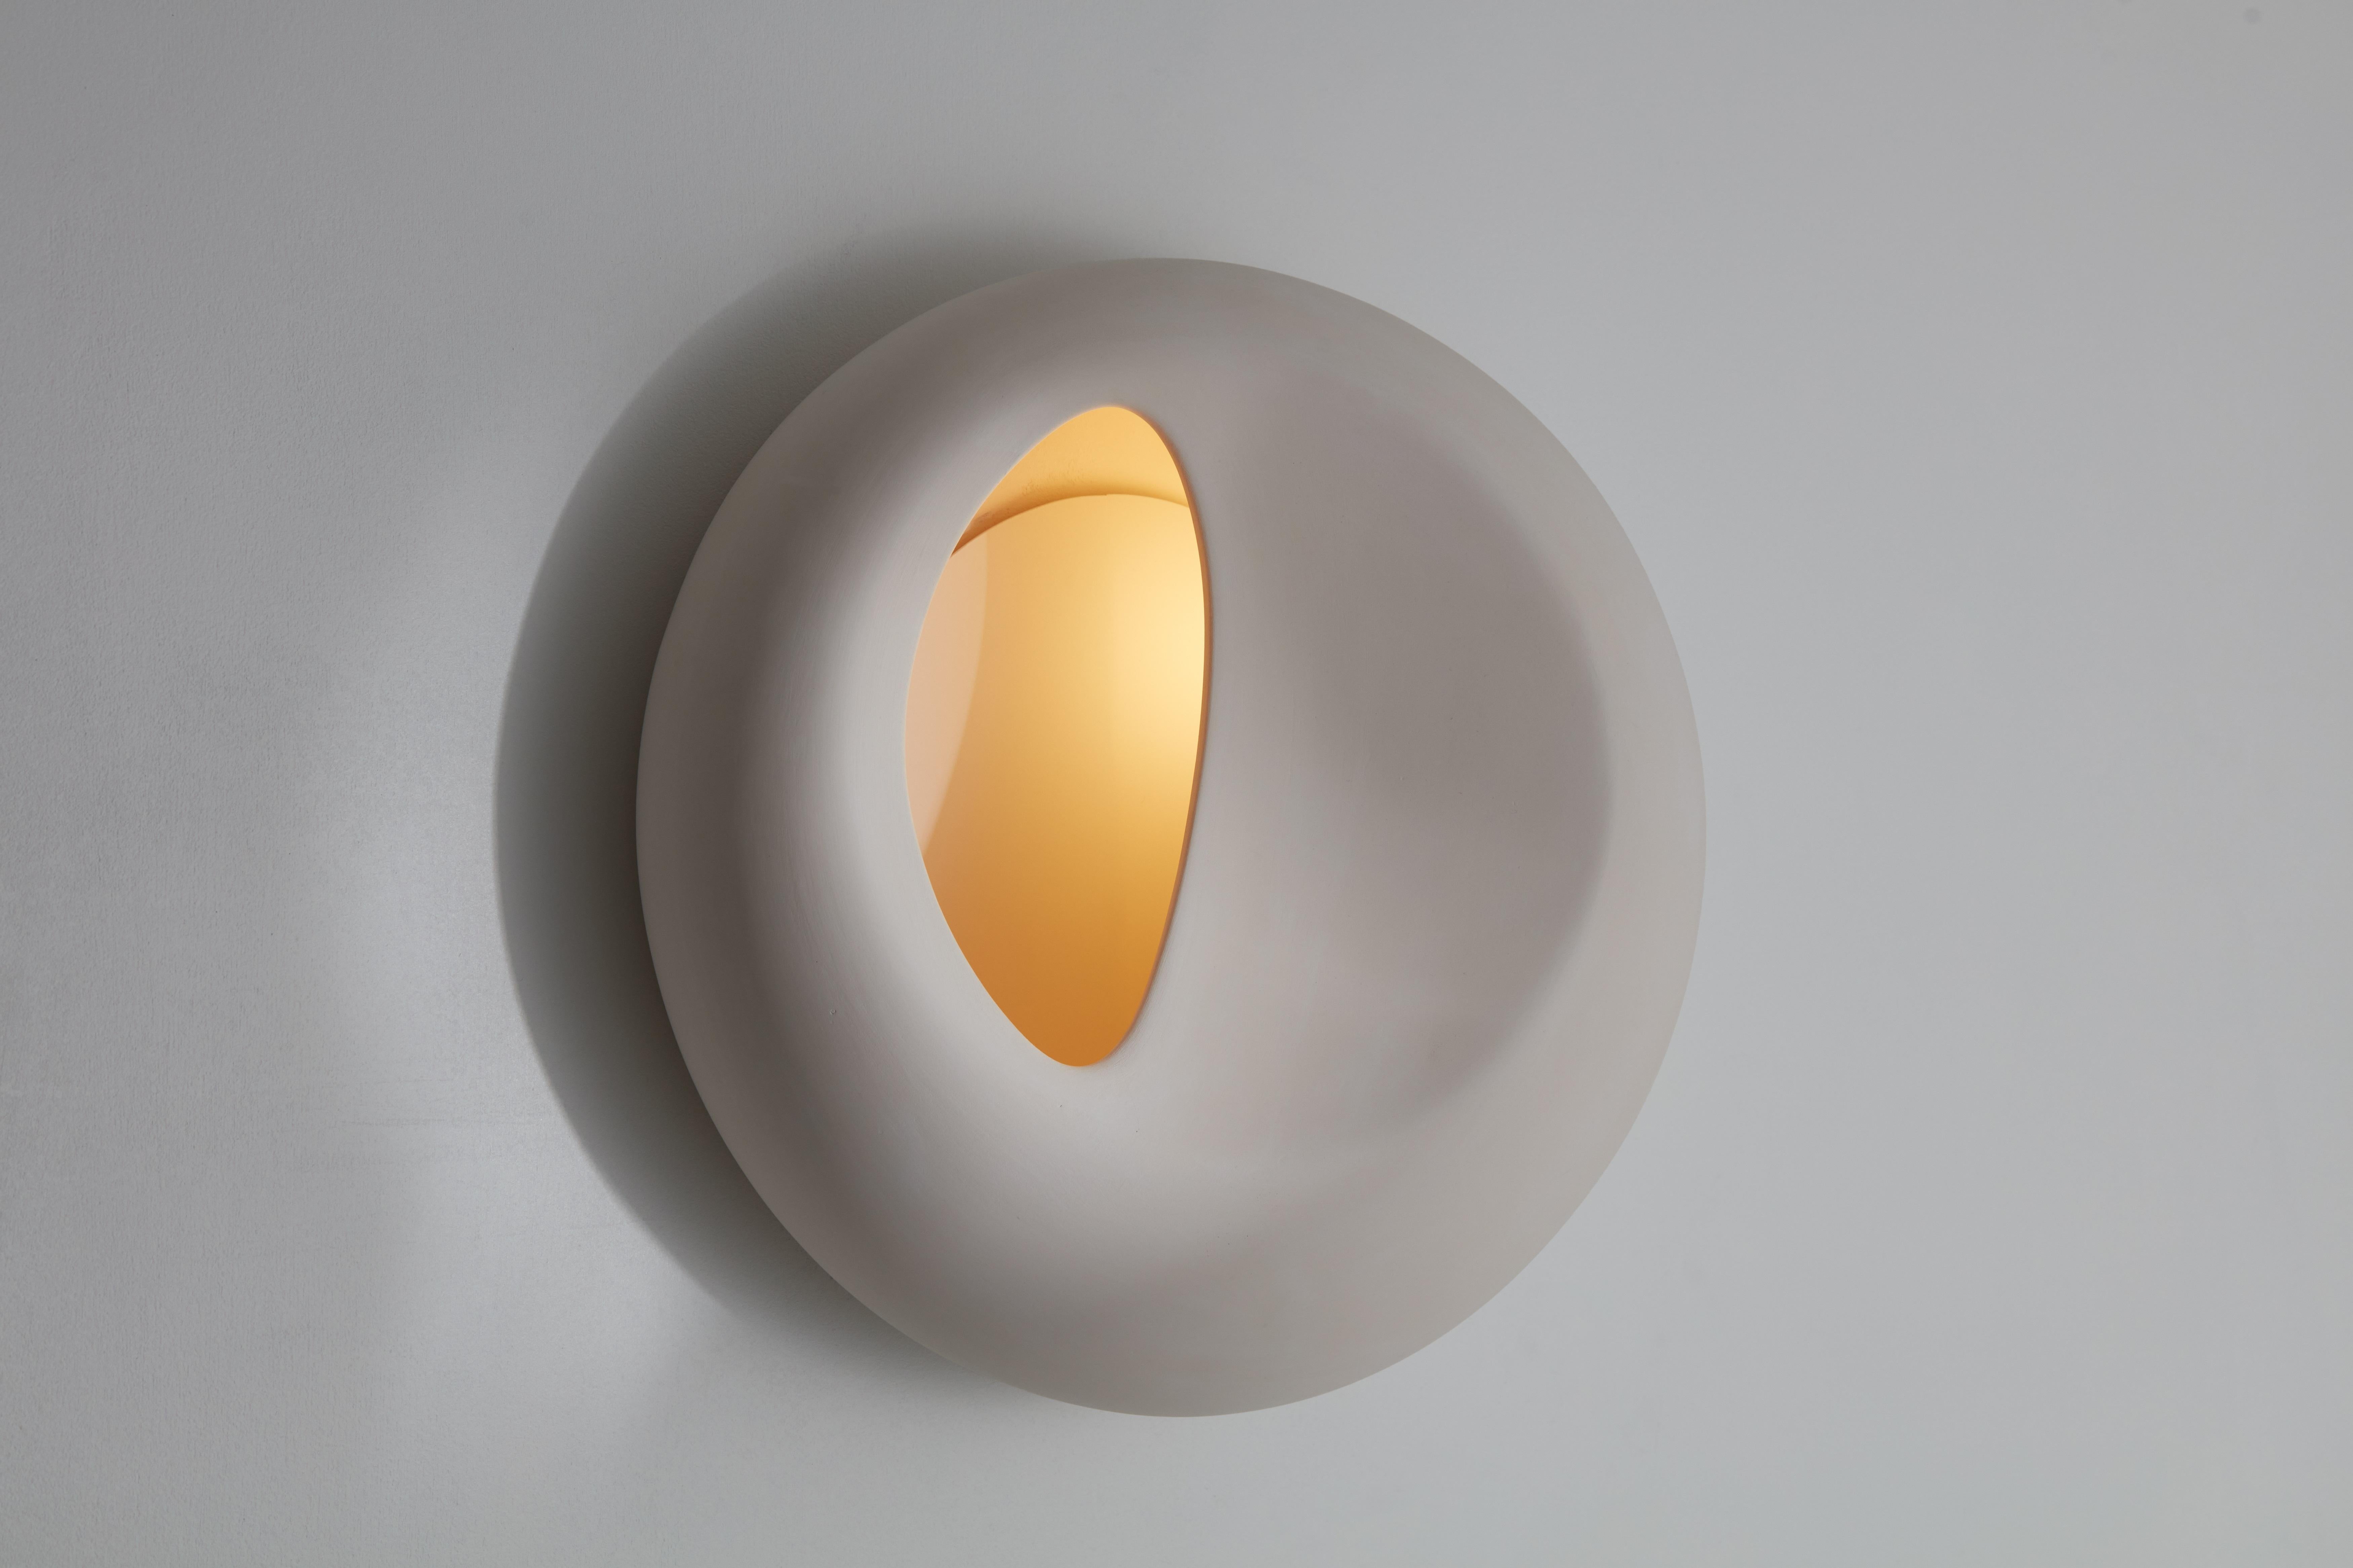 Merveilleux wall lamp by Mydriaz
Dimensions: D 36 x H 17 cm
Materials: Mass-dyed porcelain, brass.
Available in black.

Our products are handmade in our workshop. Dimensions and finishes may vary slightly from one model to another dimensions can be